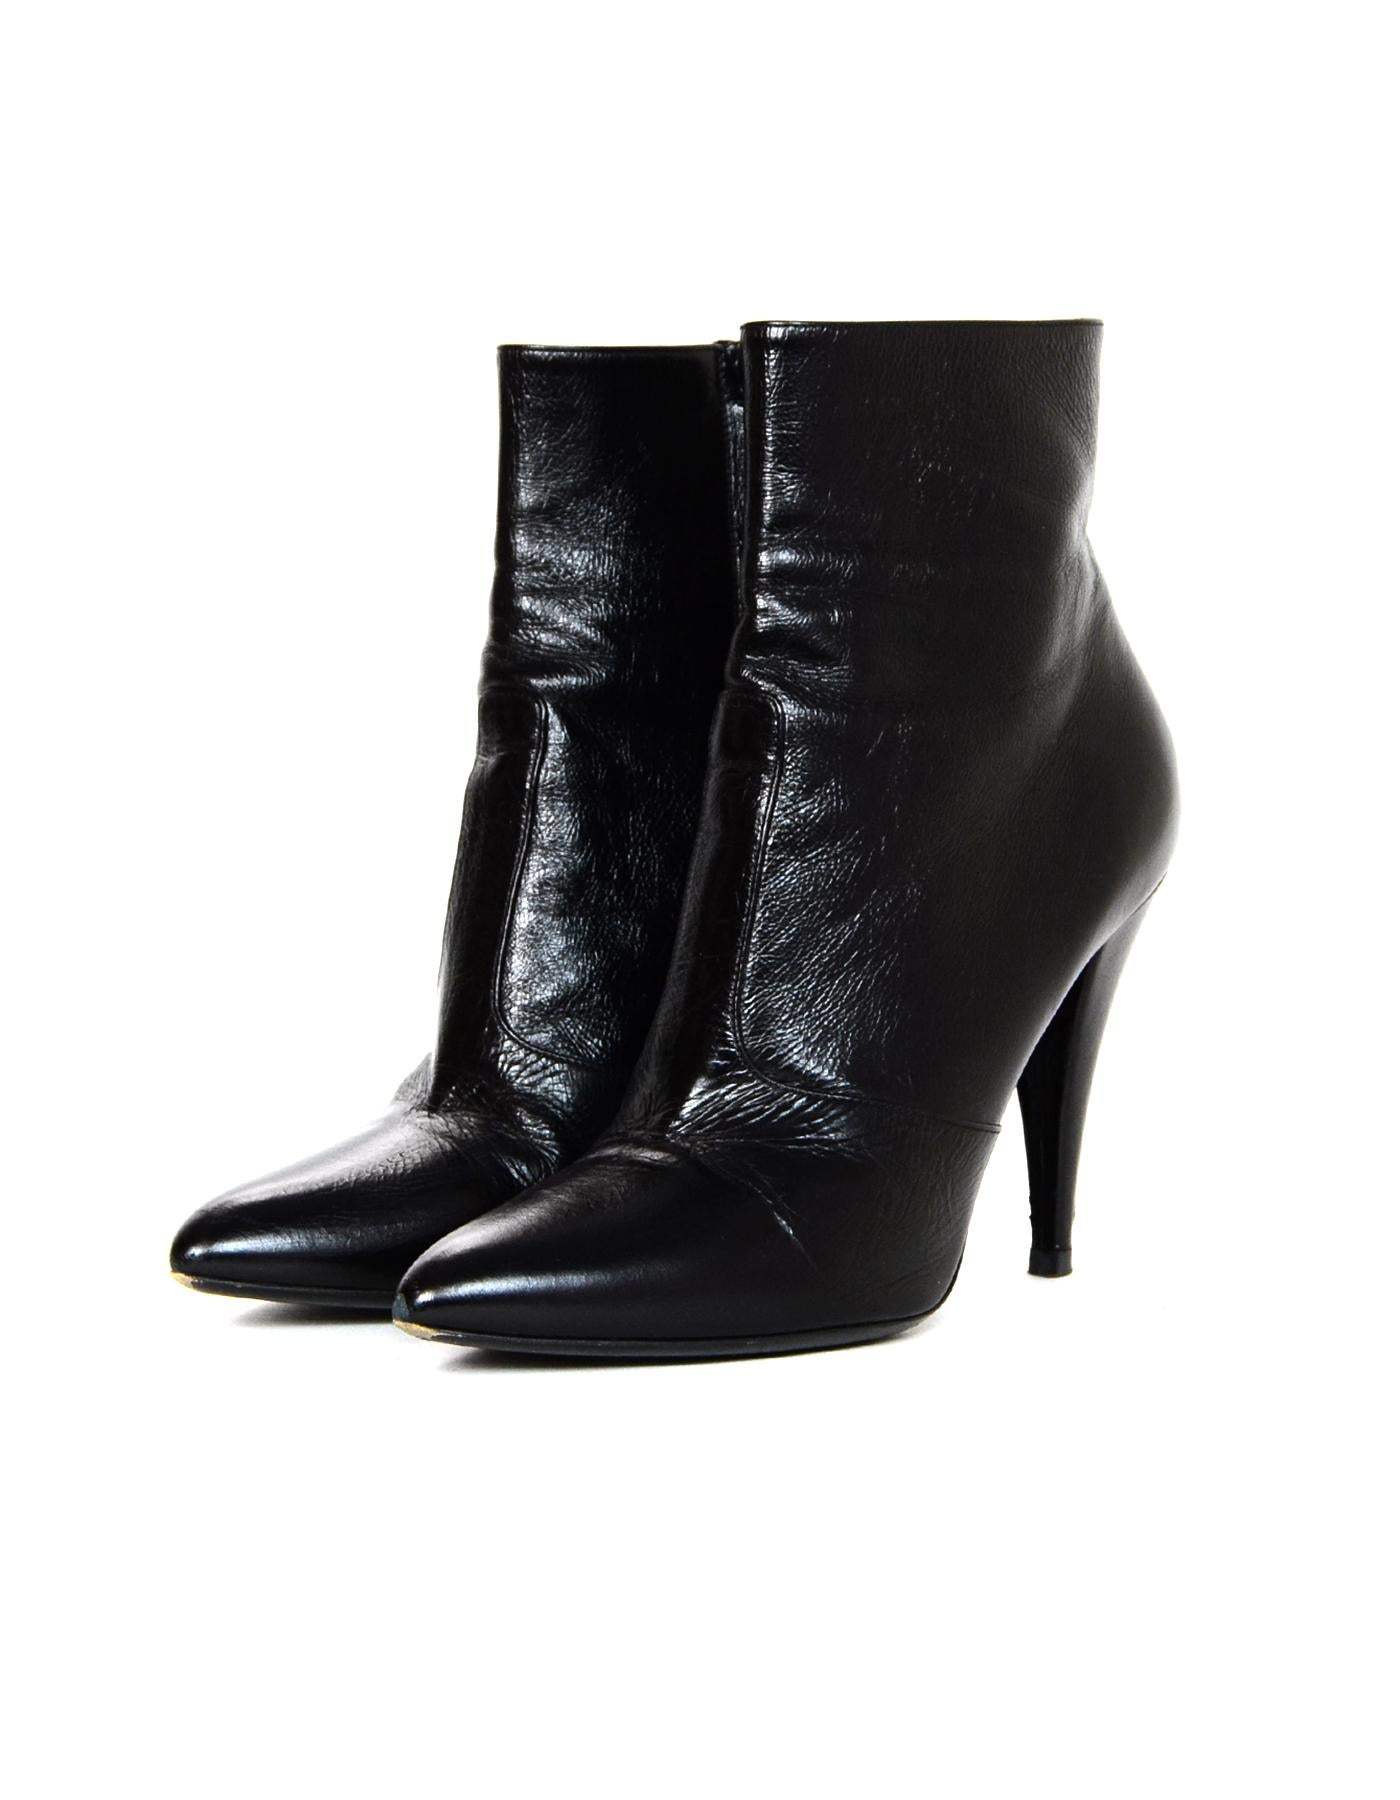 YSL Yves Saint Laurent Fetish Black Leather Ankle Boot Sz 40

Made In: Italy
Color: Black
Hardware: Black
Materials: Leather
Closure/Opening: Side zip
Overall Condition: Very good pre-owned condition with exception of some wear at toes and on back